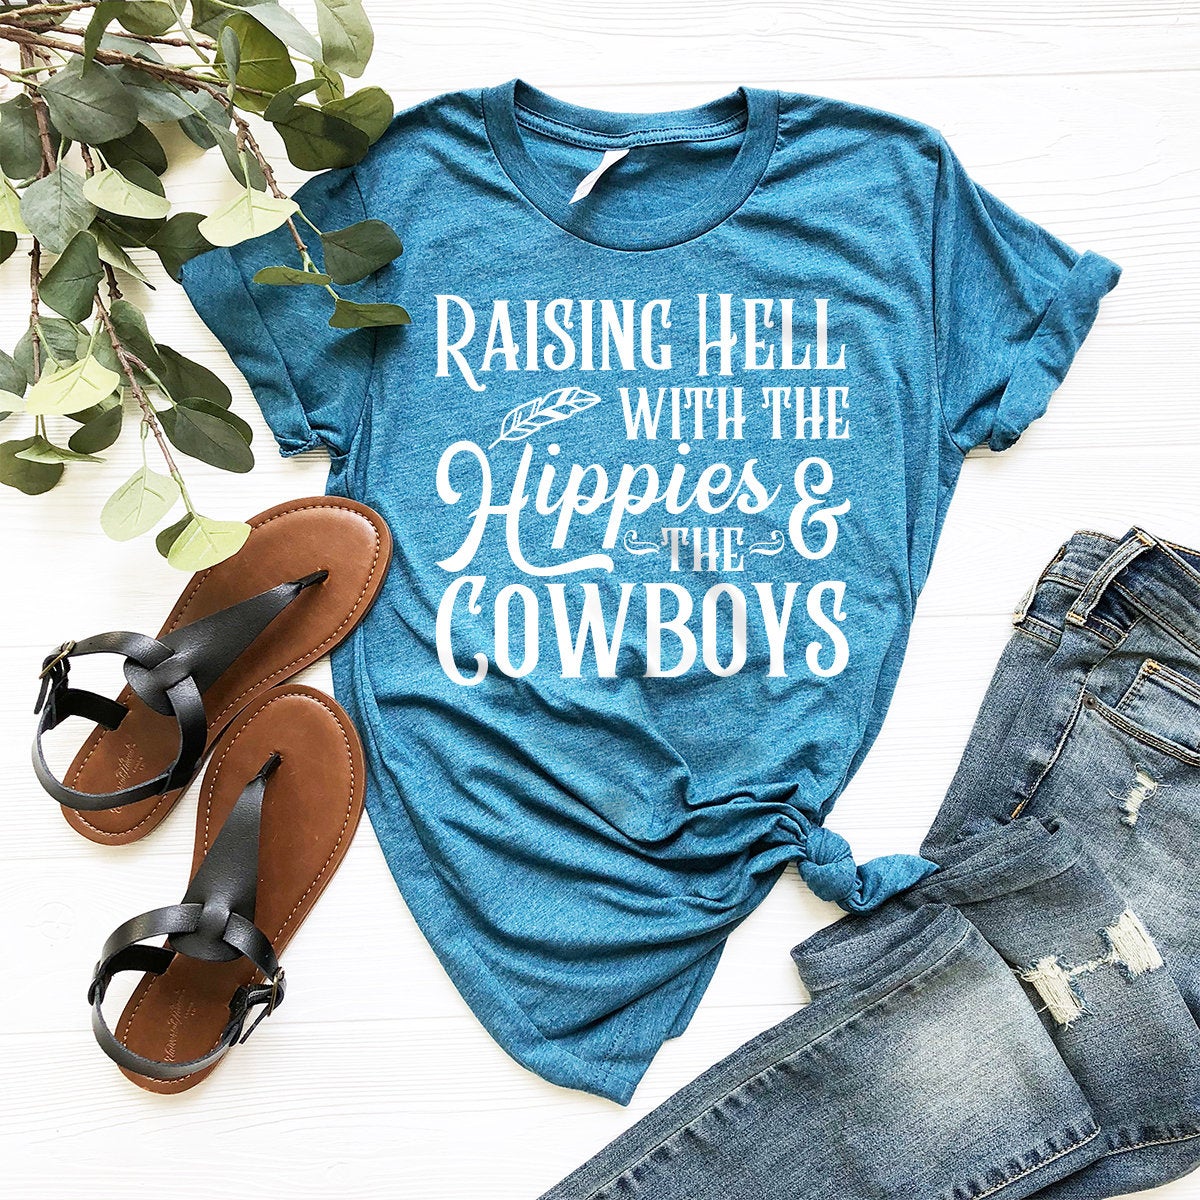 Raising Hell With The Hippies And The Cowboys Shirt, Country Music Tee, Southern Quotes Shirt, Country Western Shirt, Country Shirt - Fastdeliverytees.com